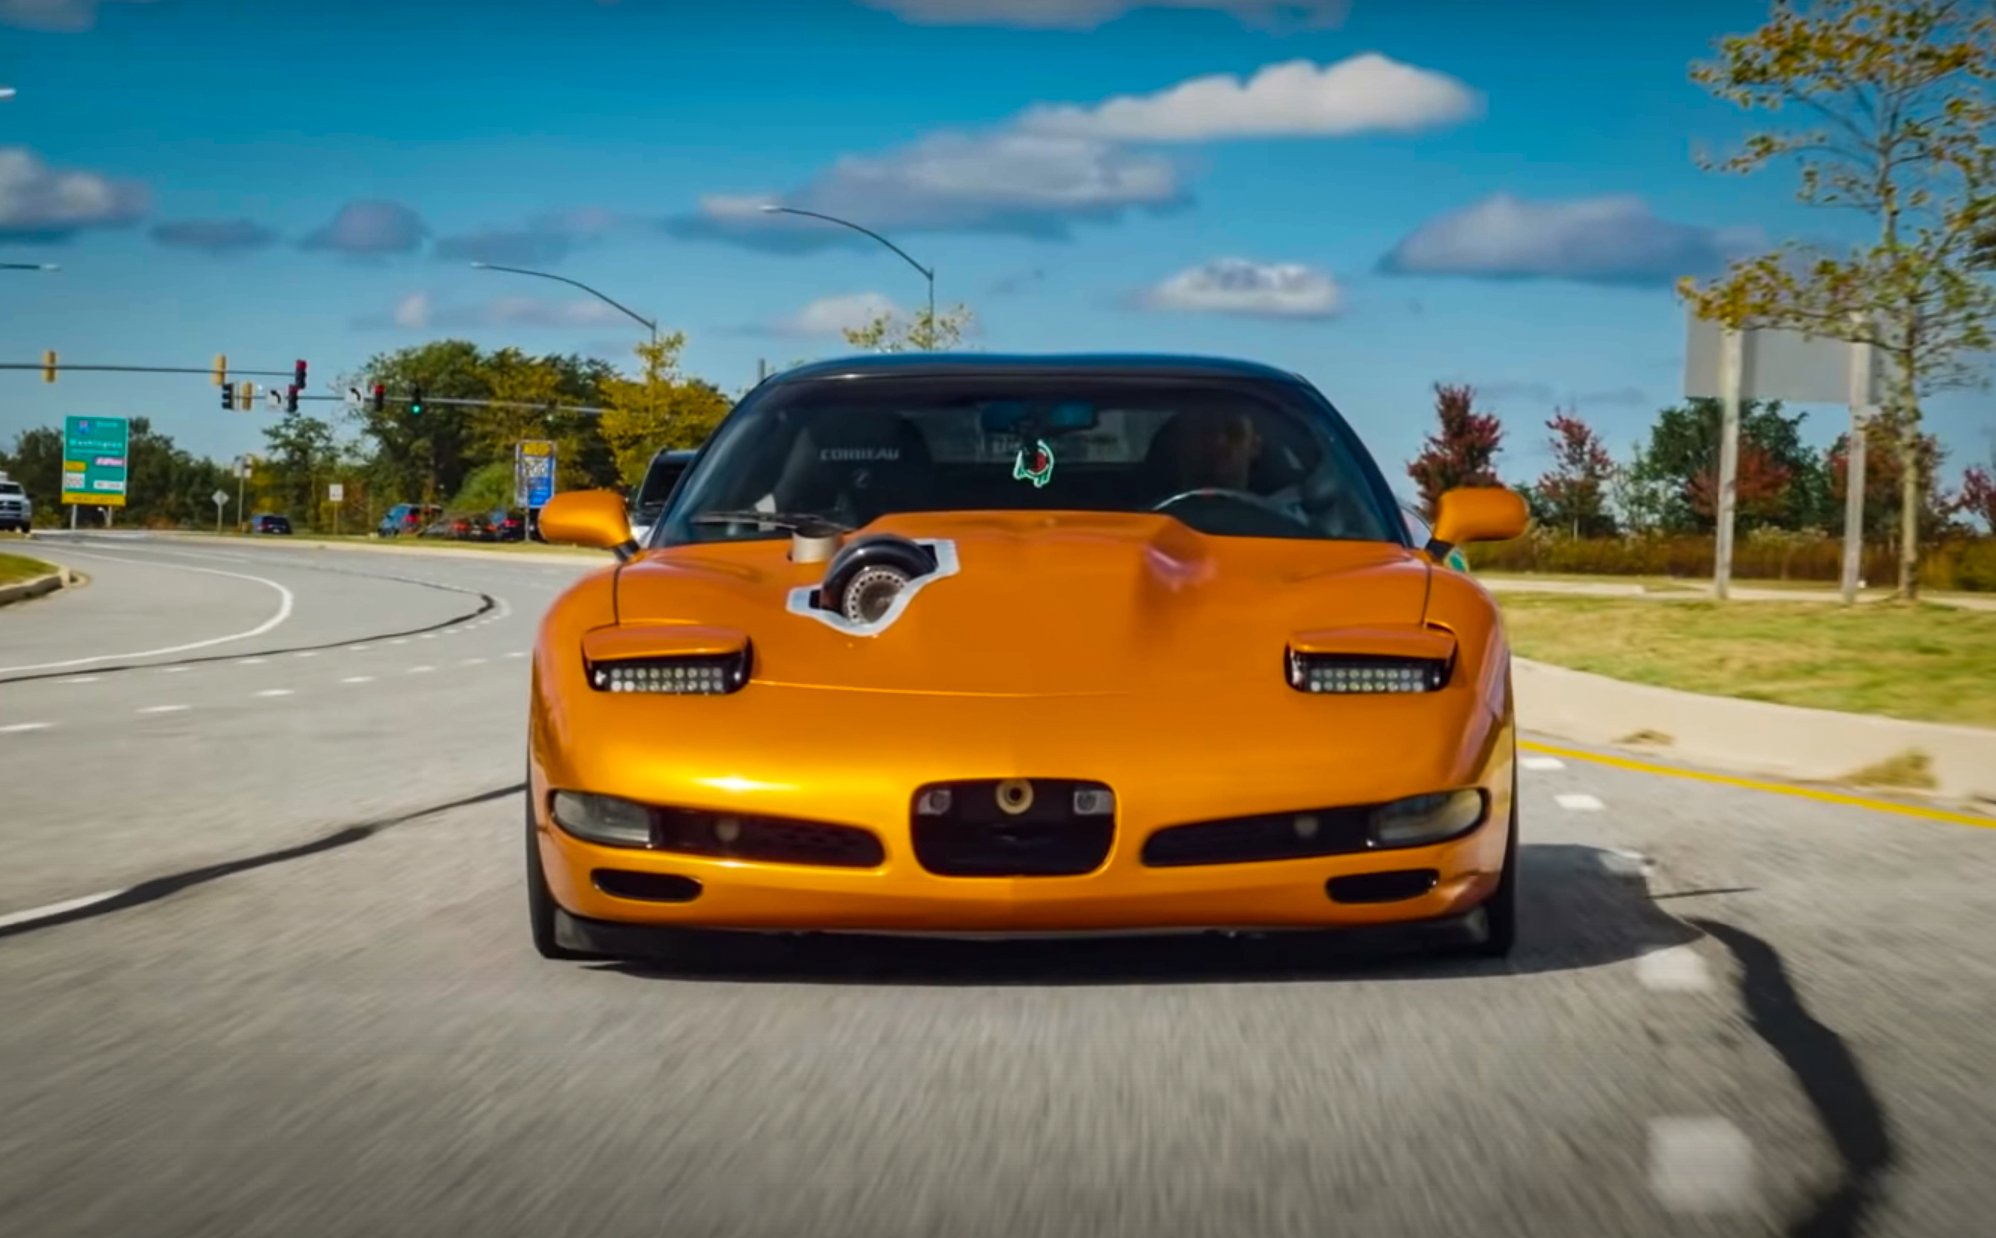 Budget Build: This C5 Corvette Is A Certified Ripper